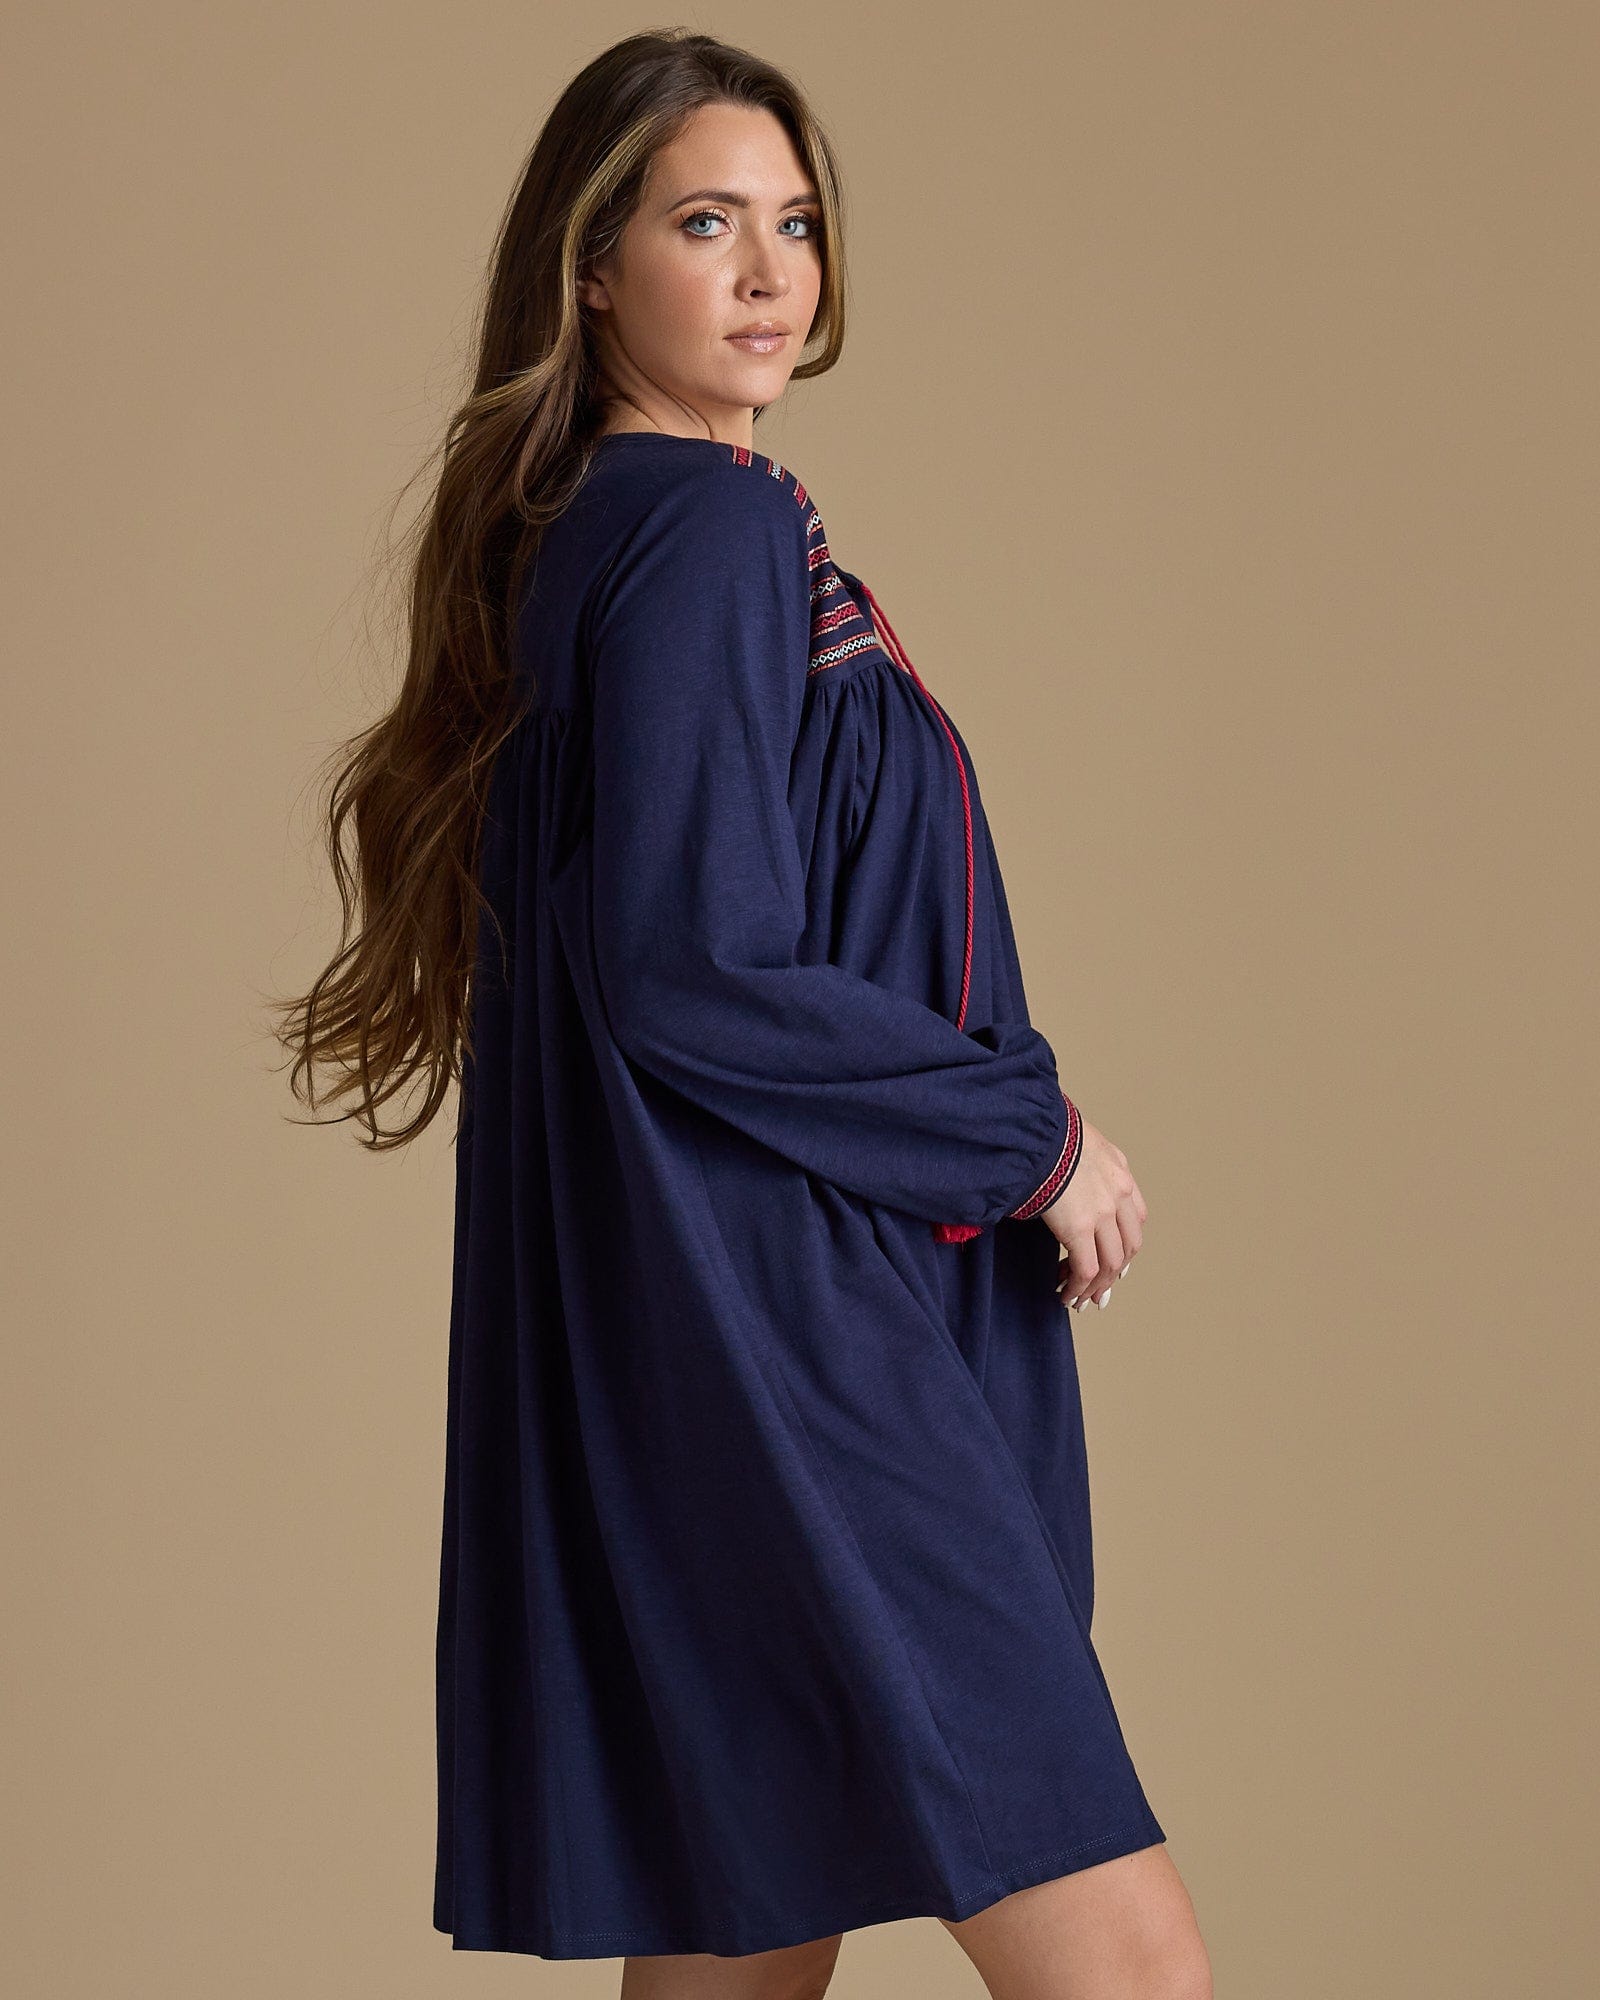 Woman in a long sleeve, knee-length, navy dress with red tassels